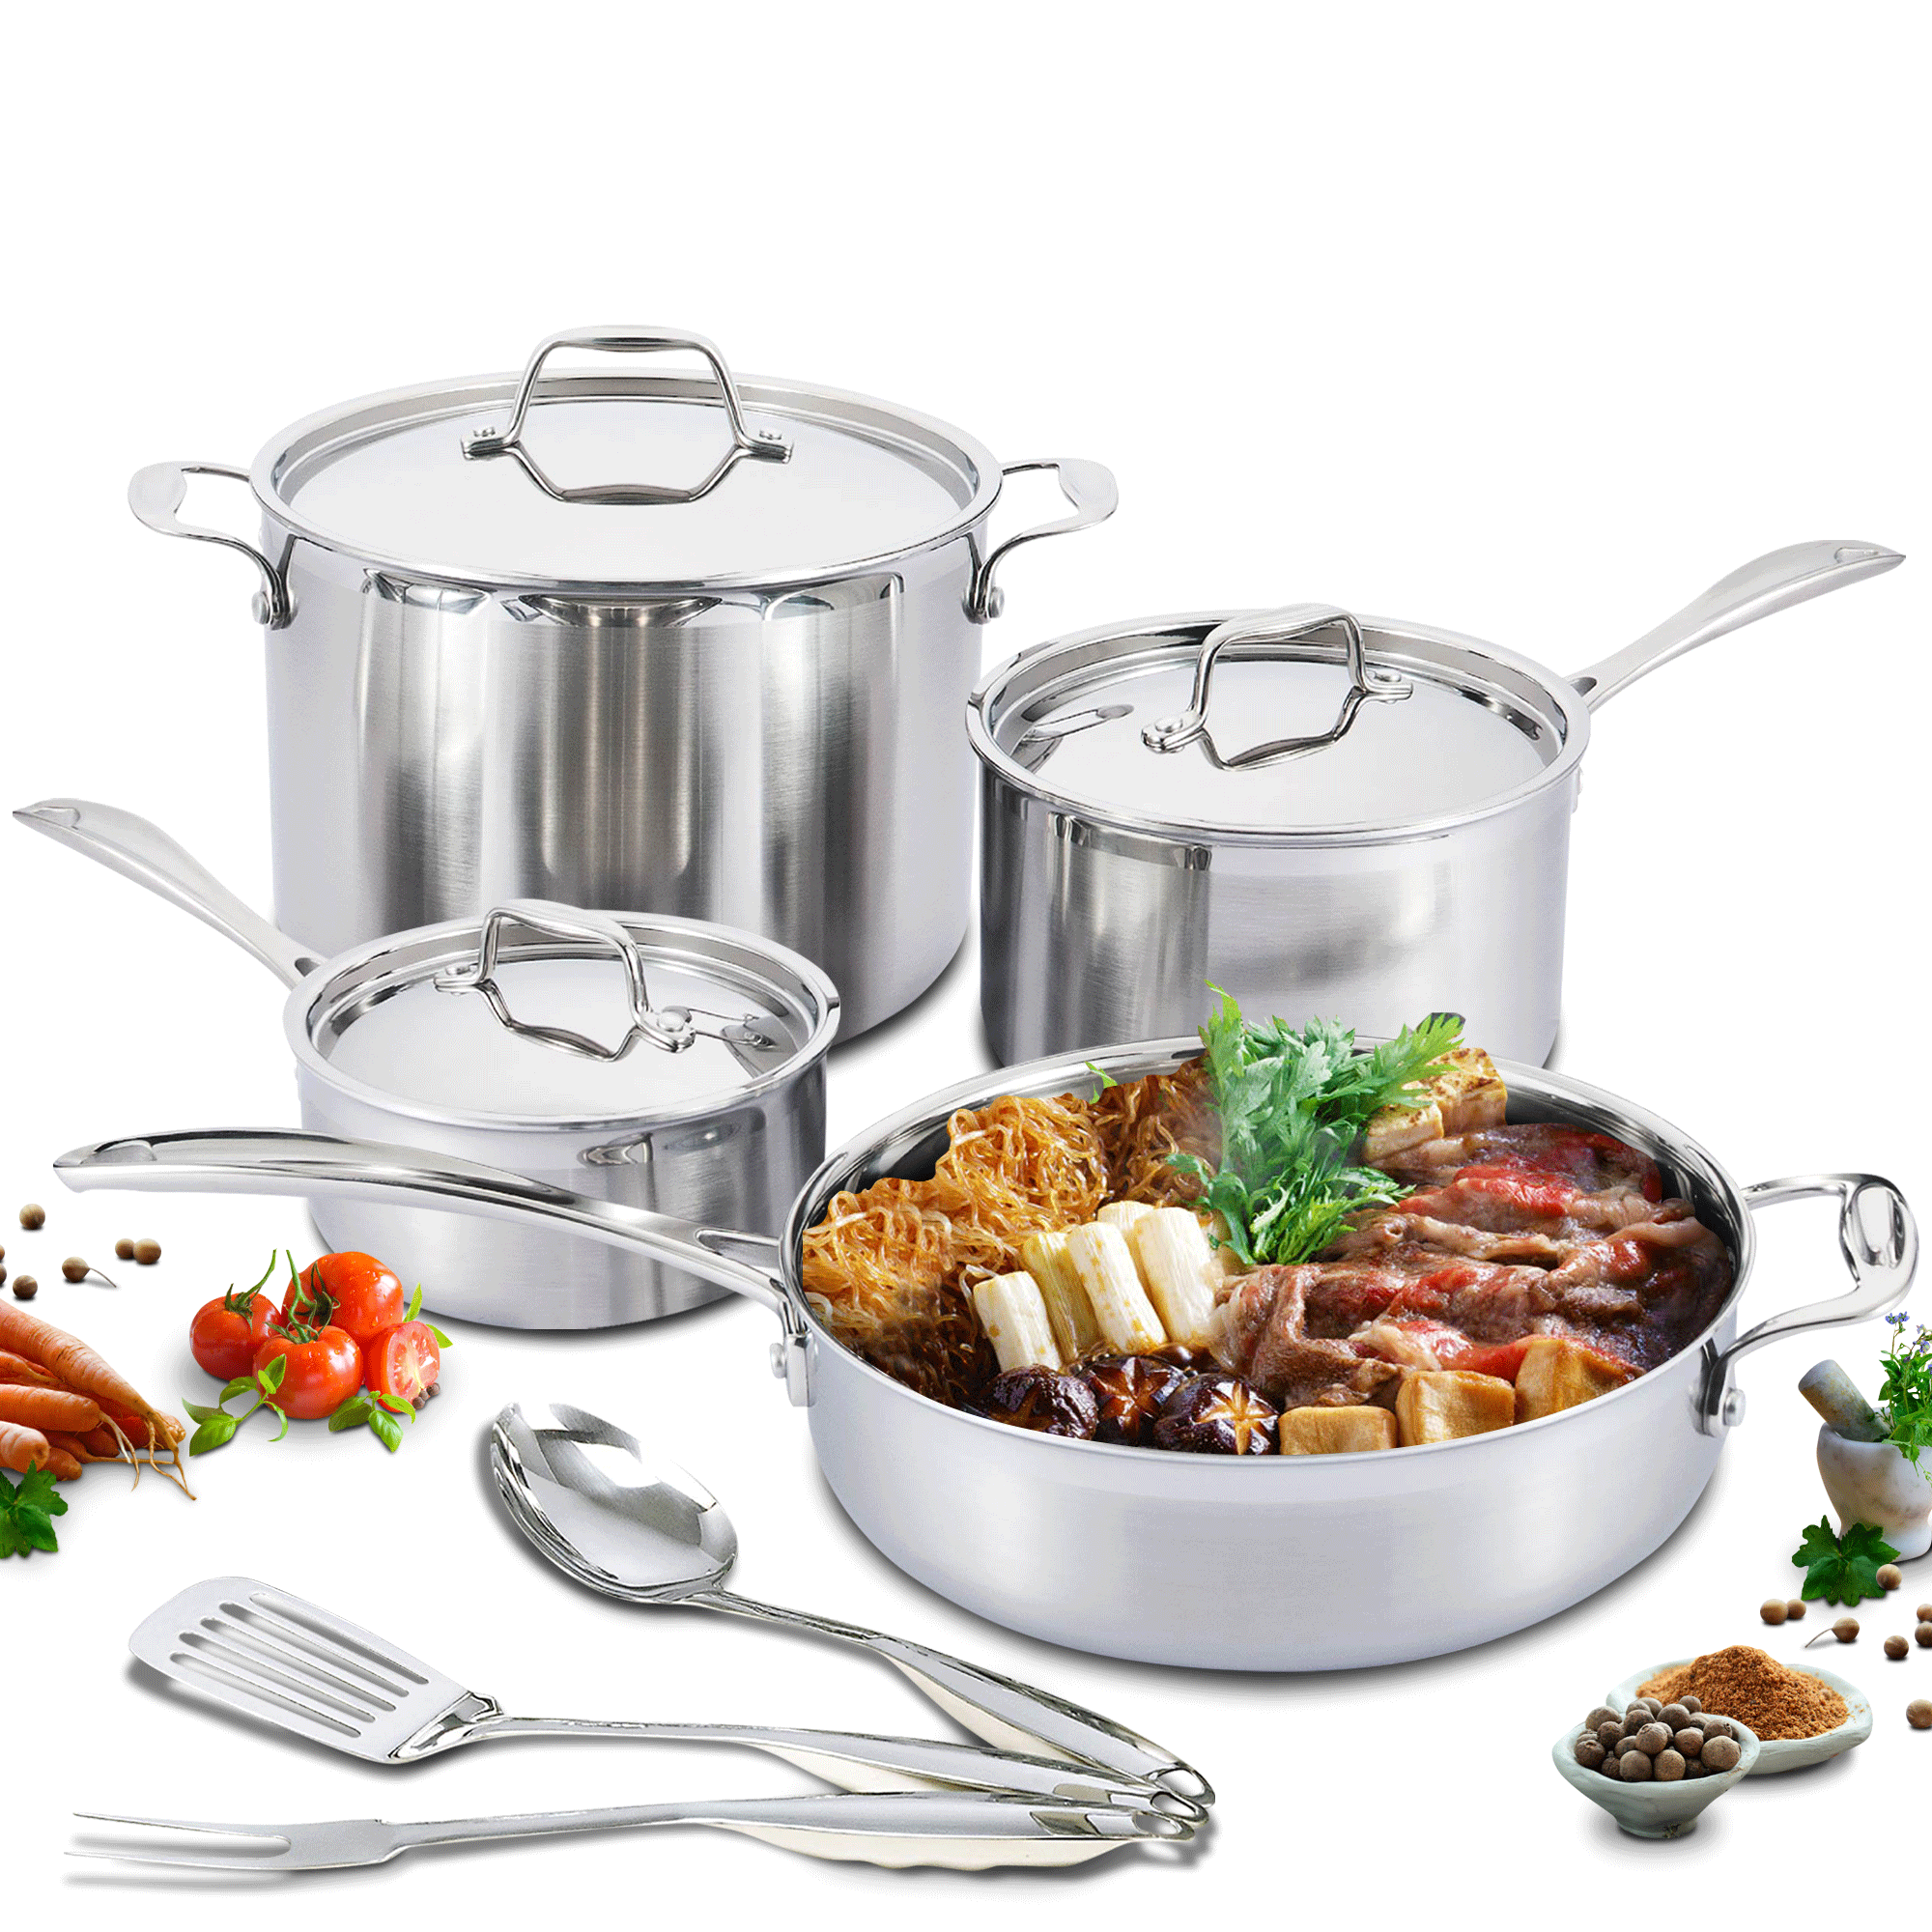  Nevlers Stainless Steel 2.8 Liter Steamer Pot with 1.9 Liter Steamer  Insert and Glass Vented Lid - Safe and Durable: Home & Kitchen